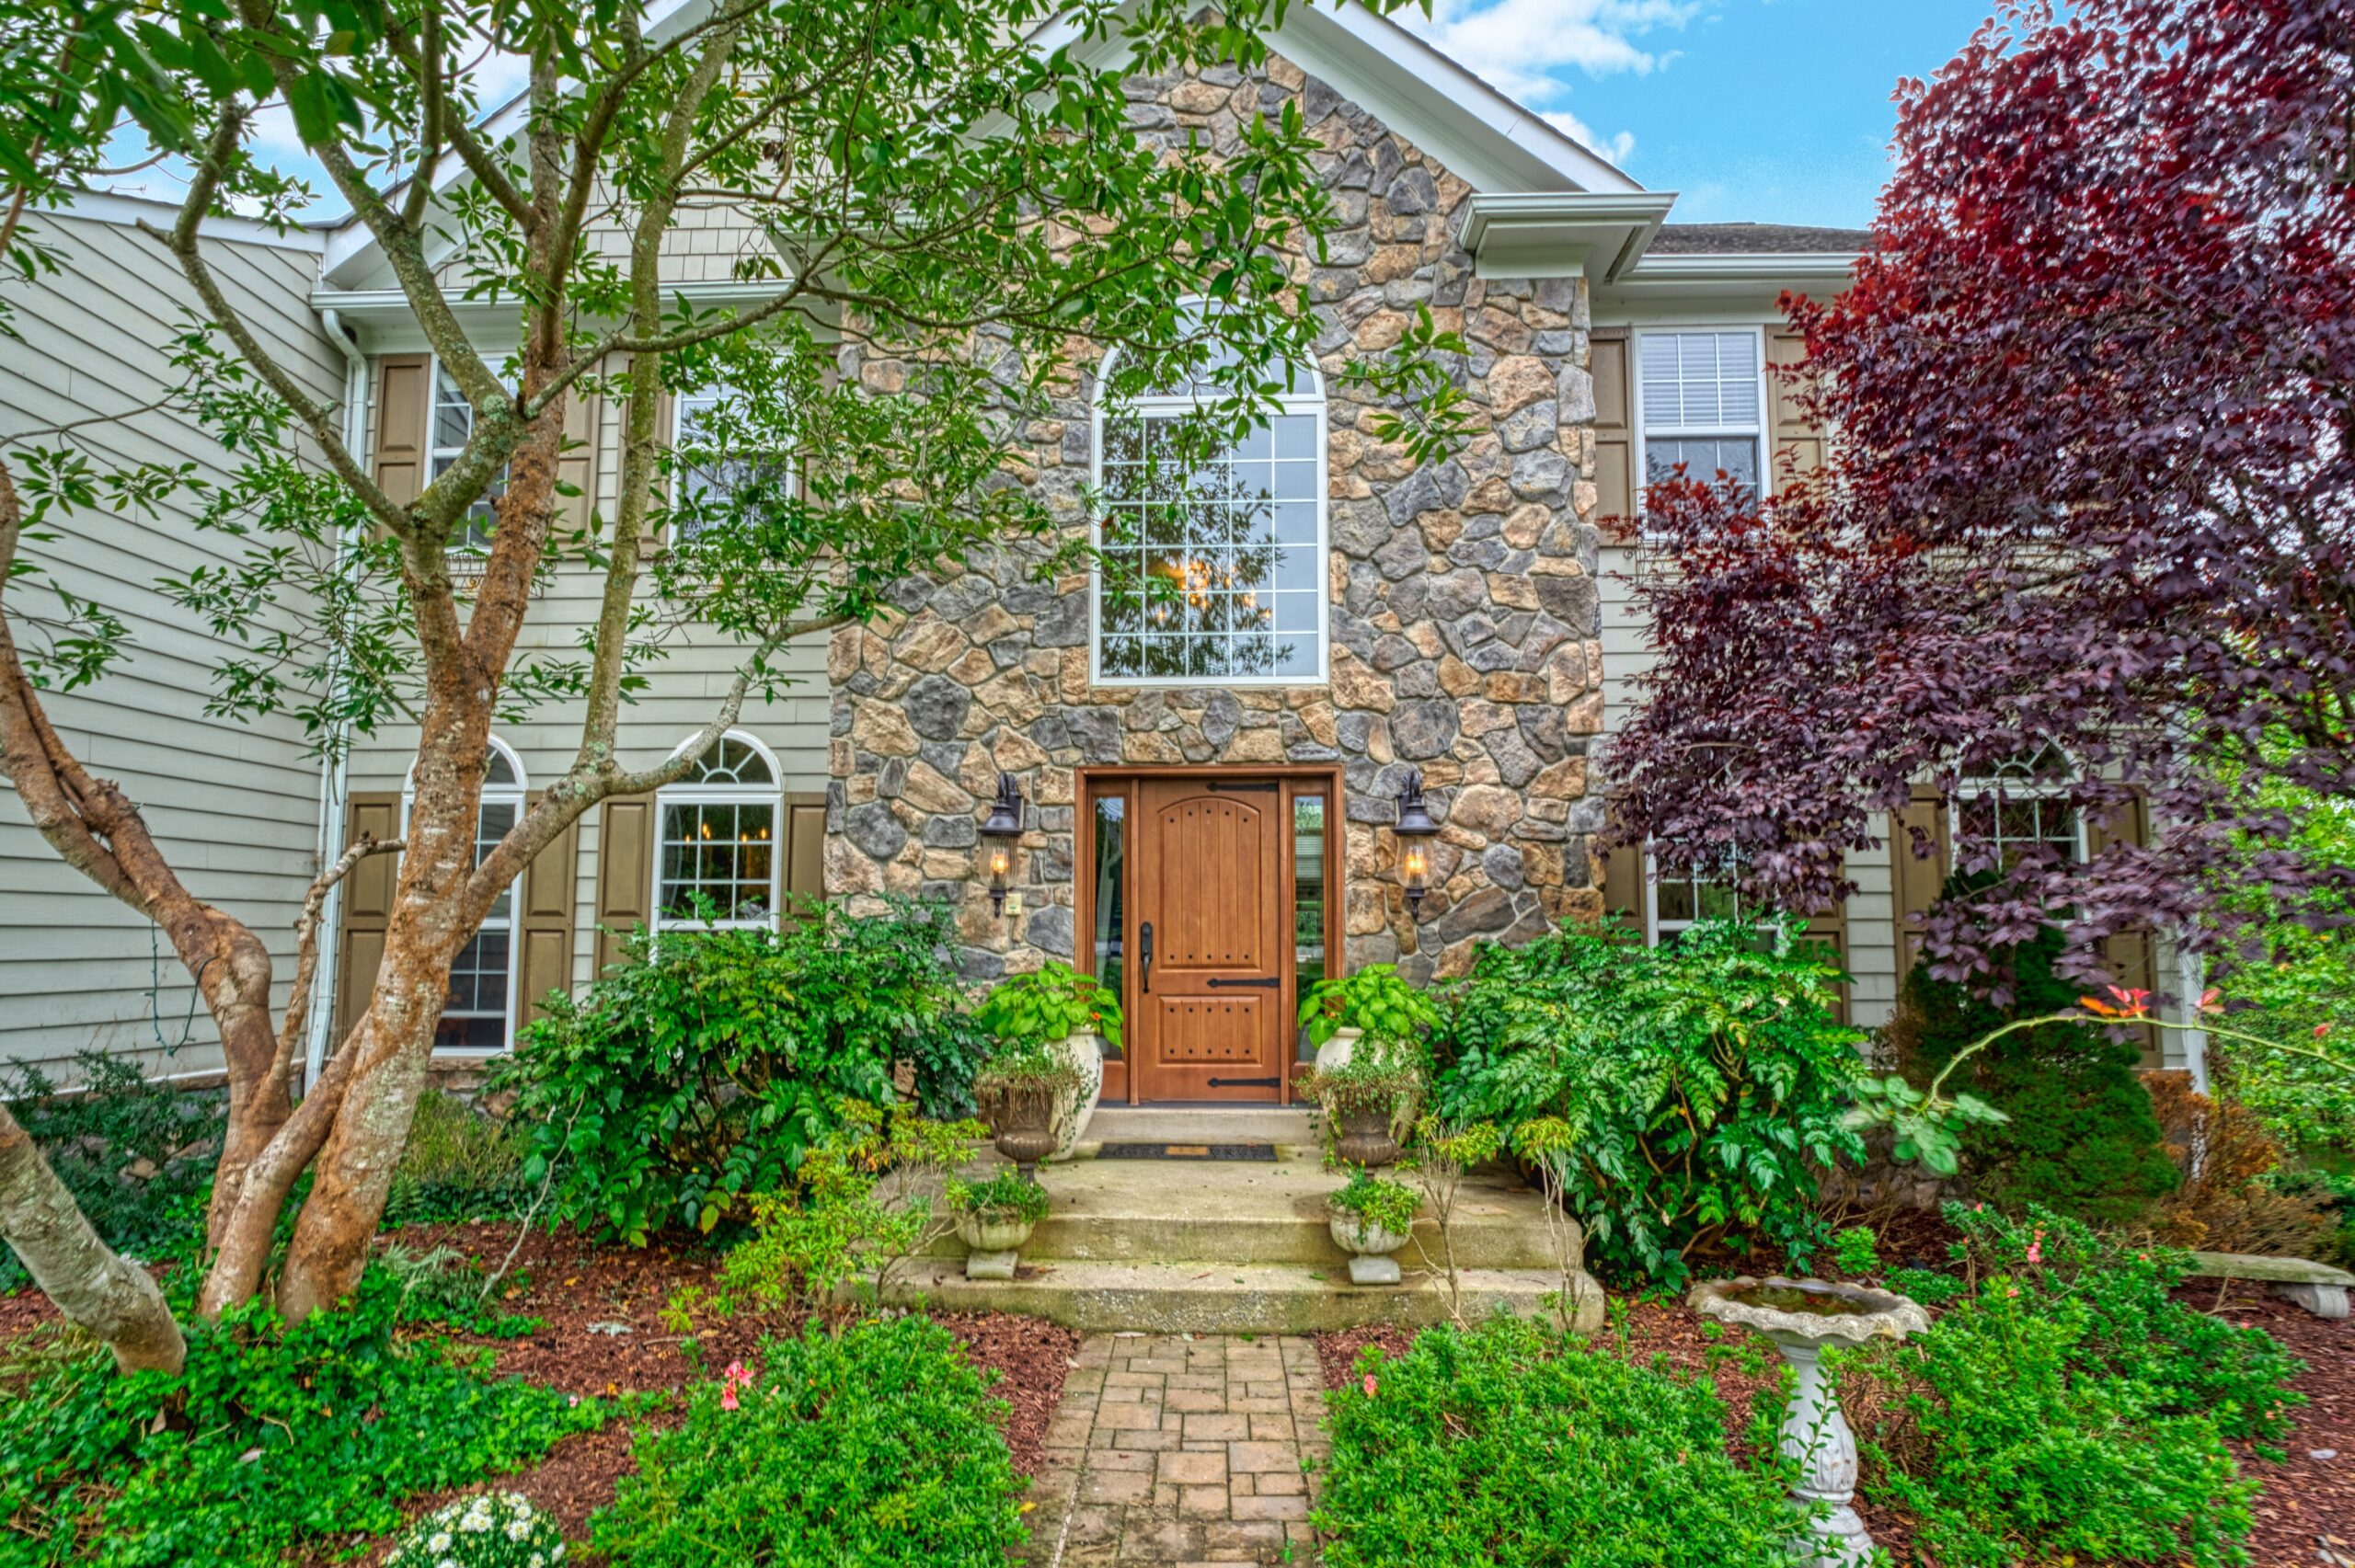 Professional exterior photo of 16961 Heather Knolls Pl - showing the front stone entryway and beige vinyl siding with lush landscaping